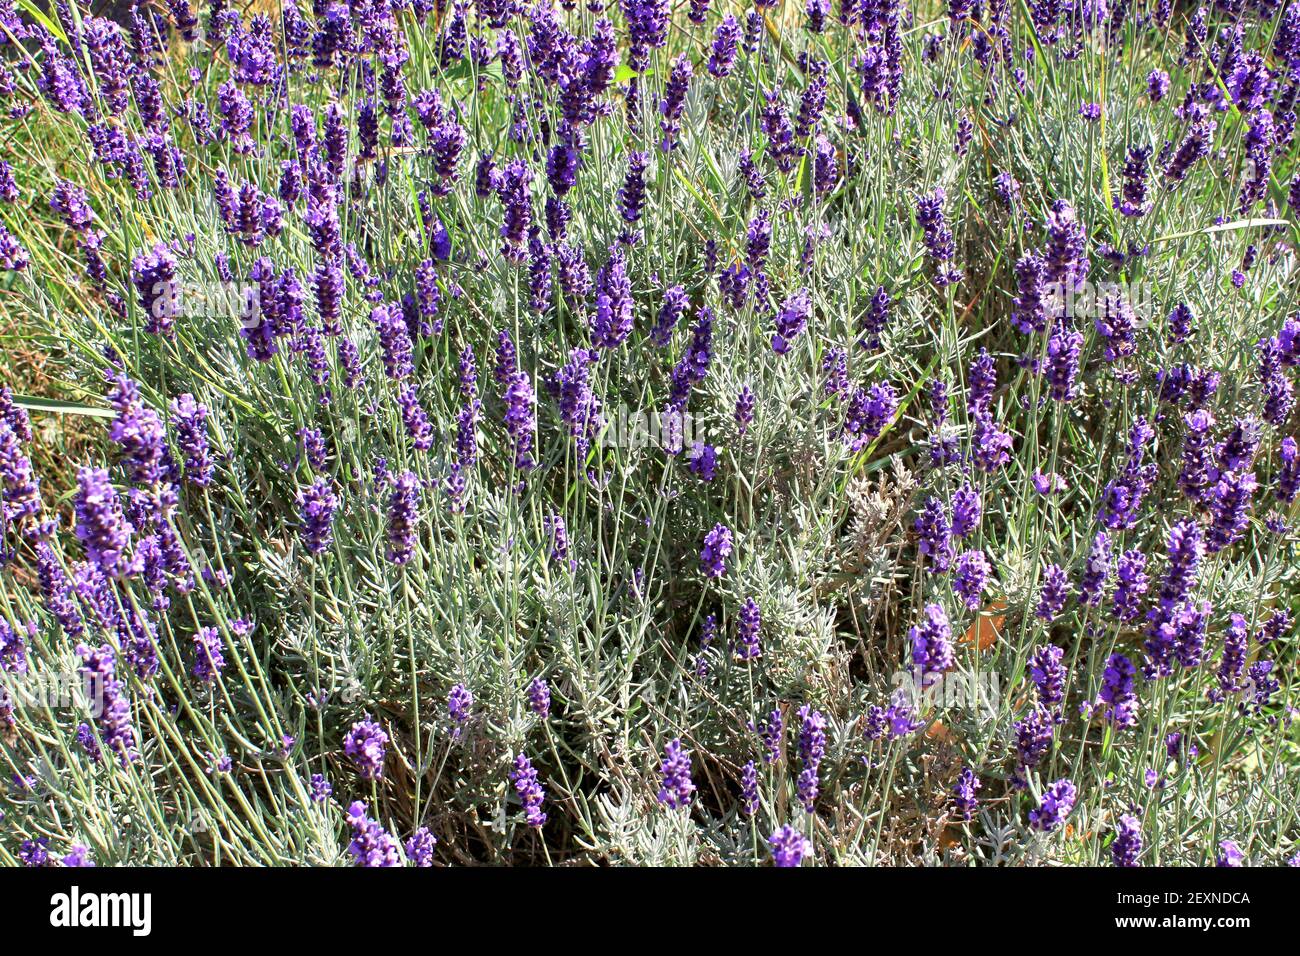 Field of lavender Stock Photo